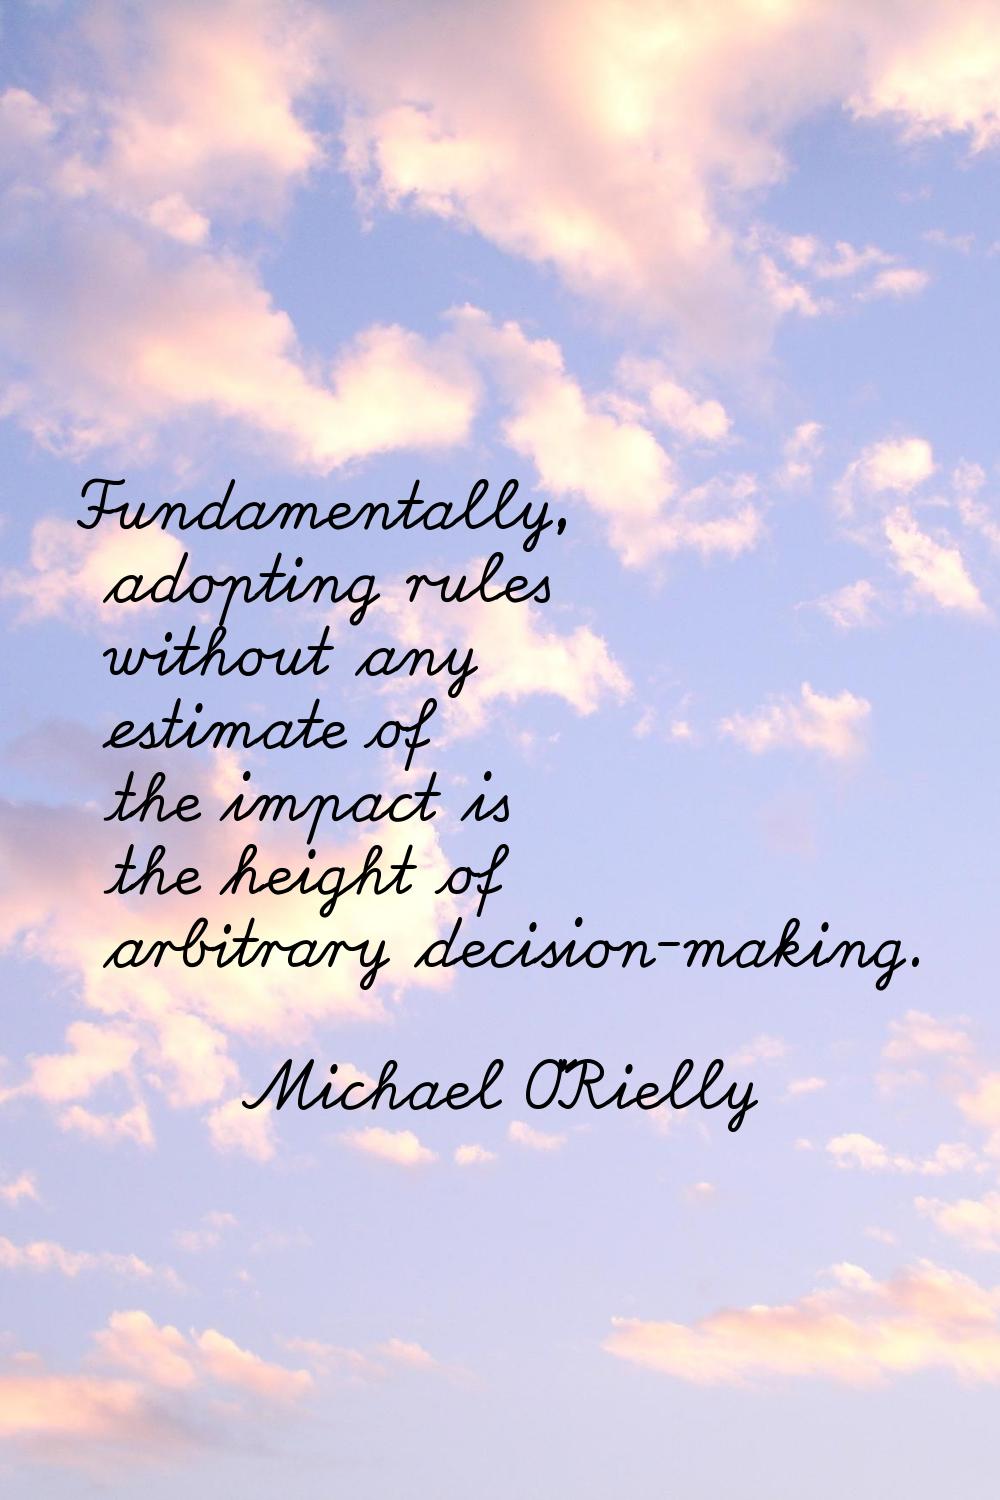 Fundamentally, adopting rules without any estimate of the impact is the height of arbitrary decisio